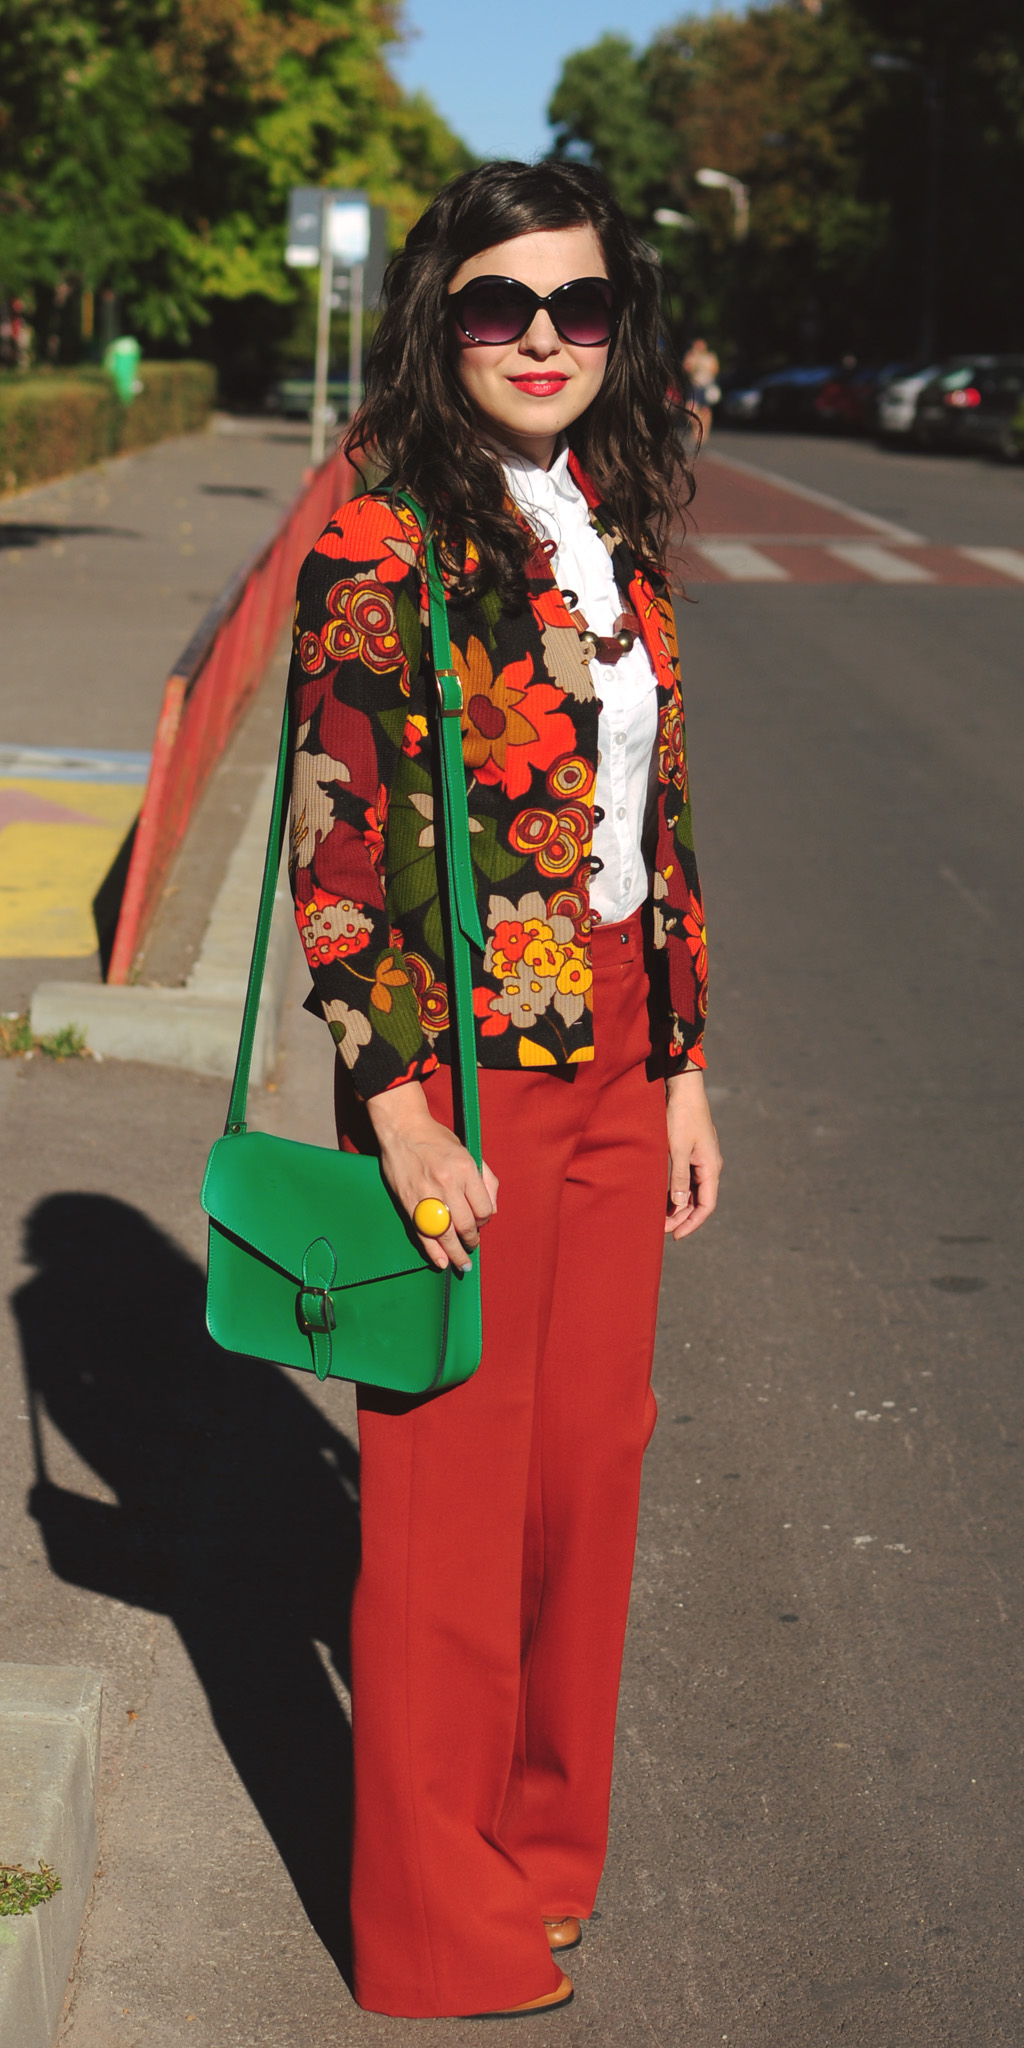 70s style outfit flowers blazer flares orange green satchel bag curly hair autumn thrifted